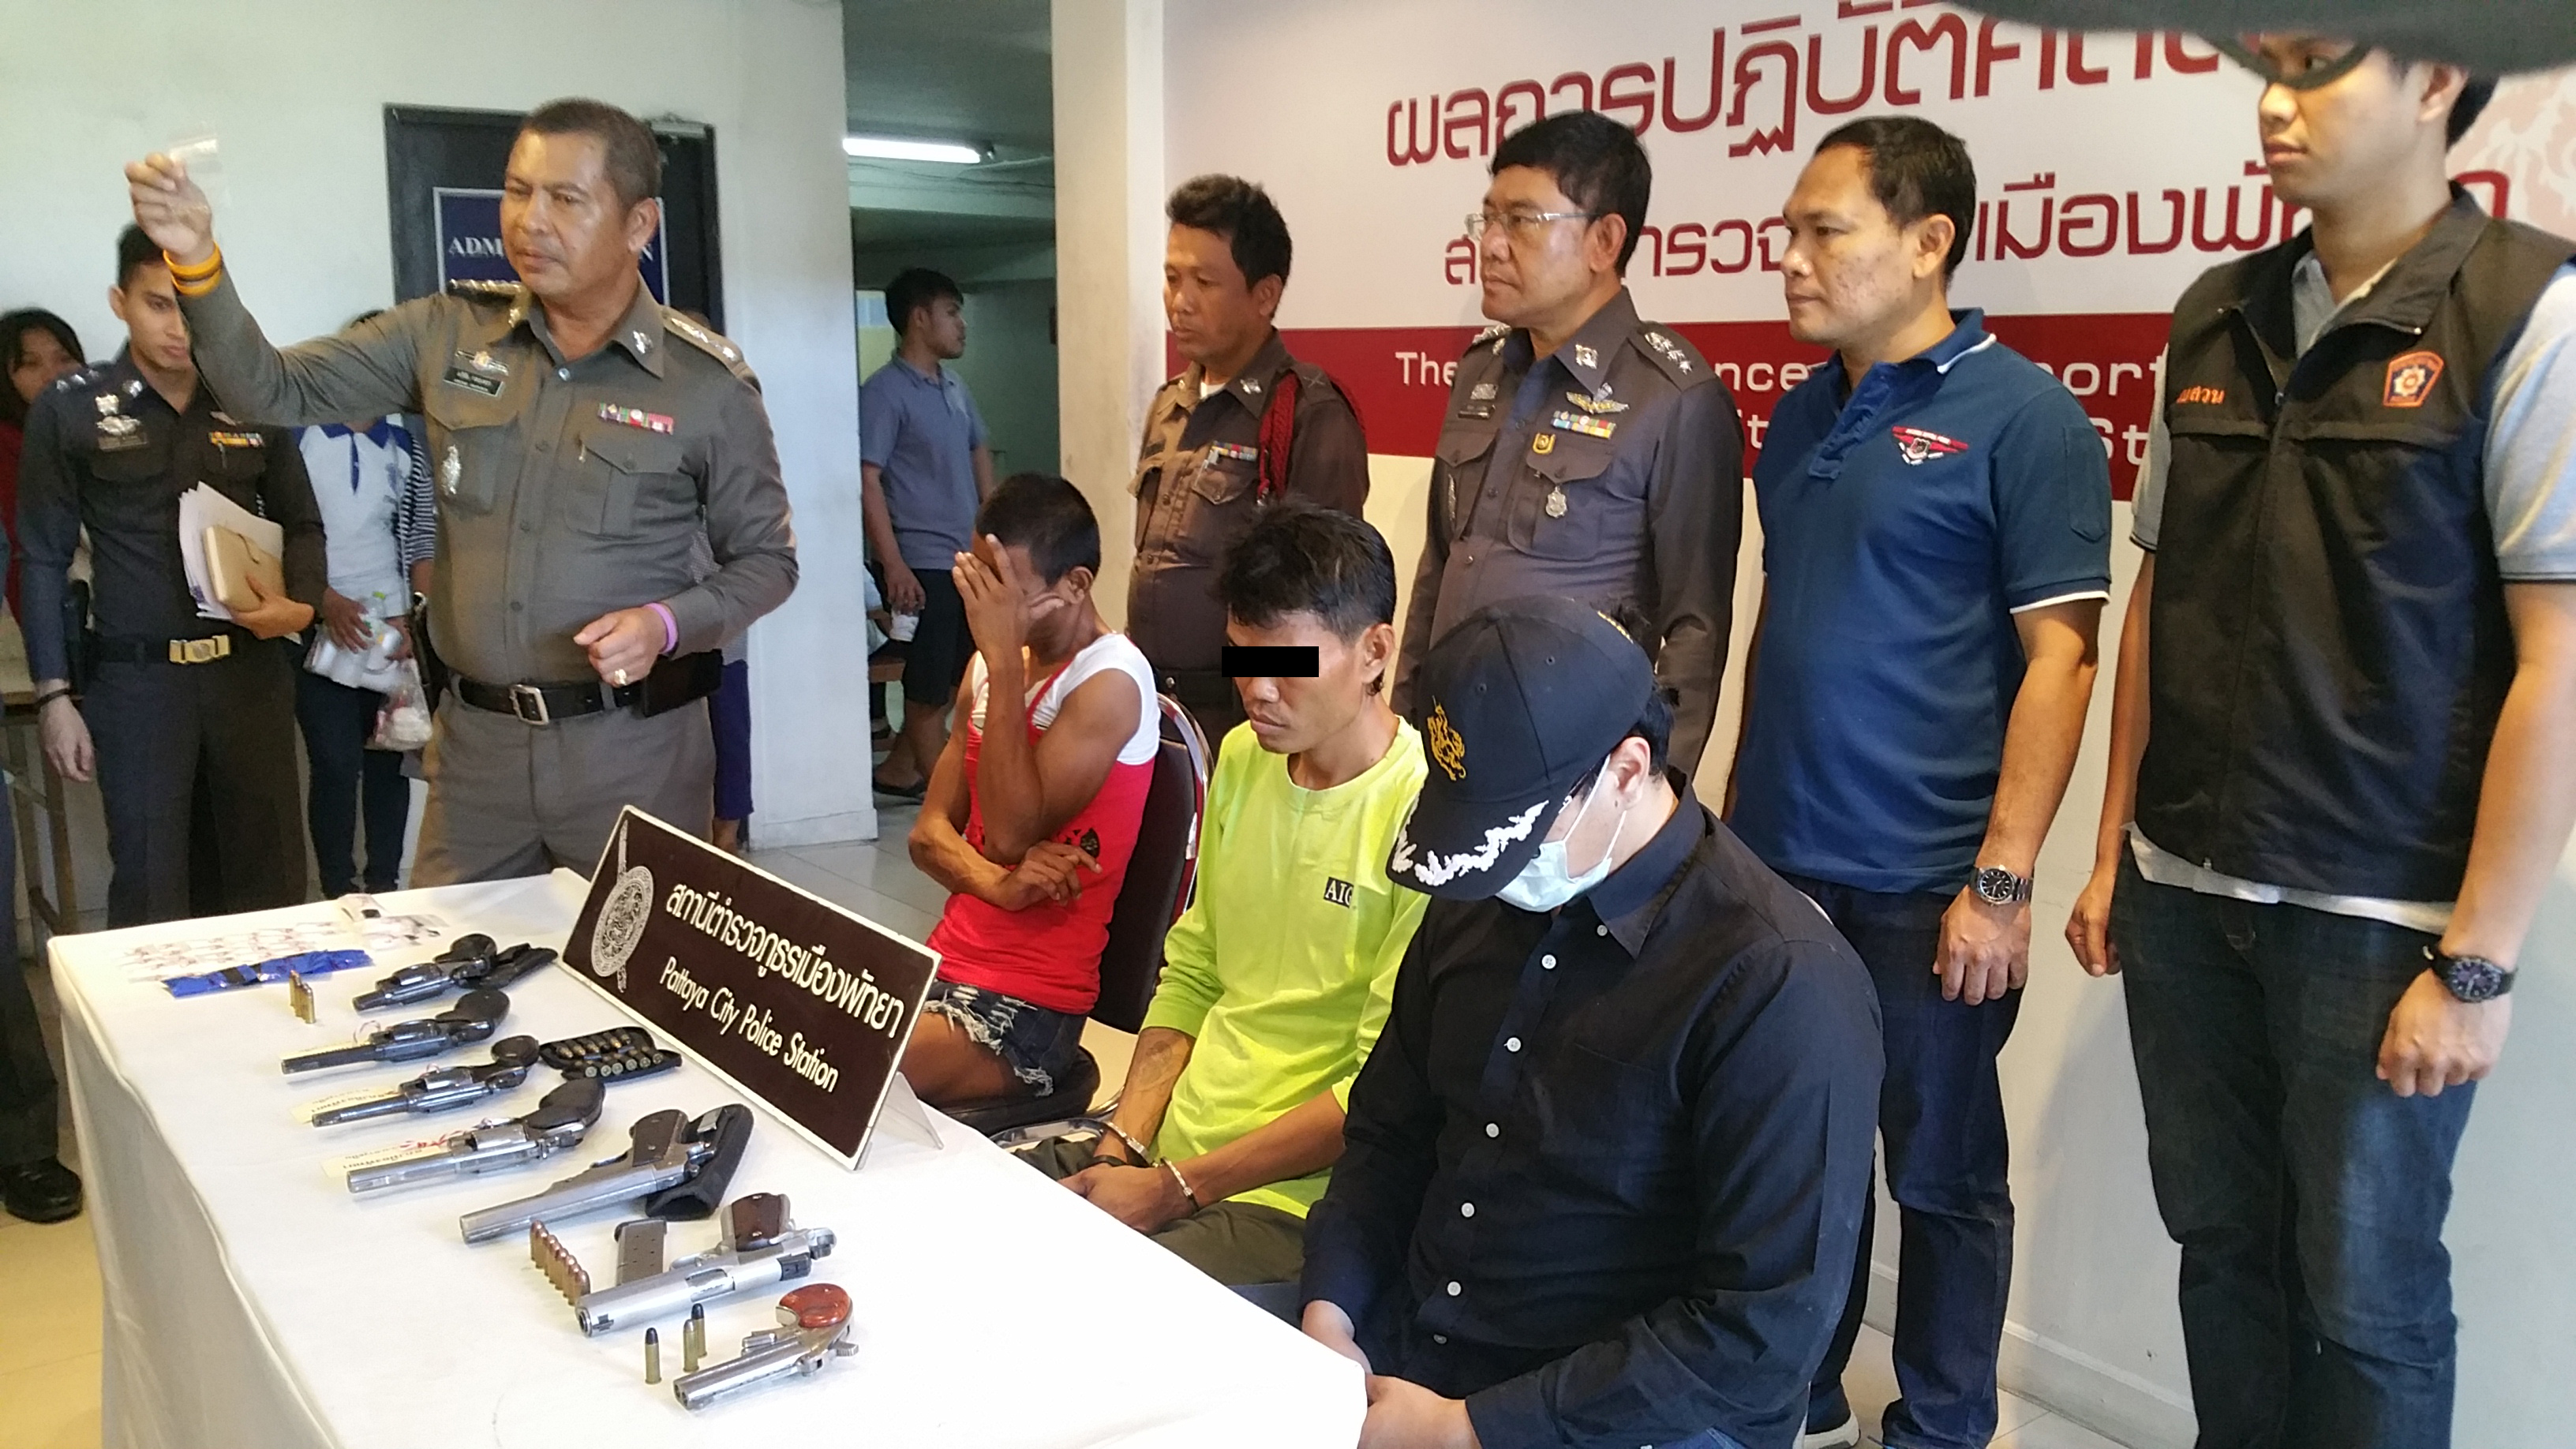 Pattaya police arrested 11 people on drugs, weapons and robbery charges in a week-long crime sweep.